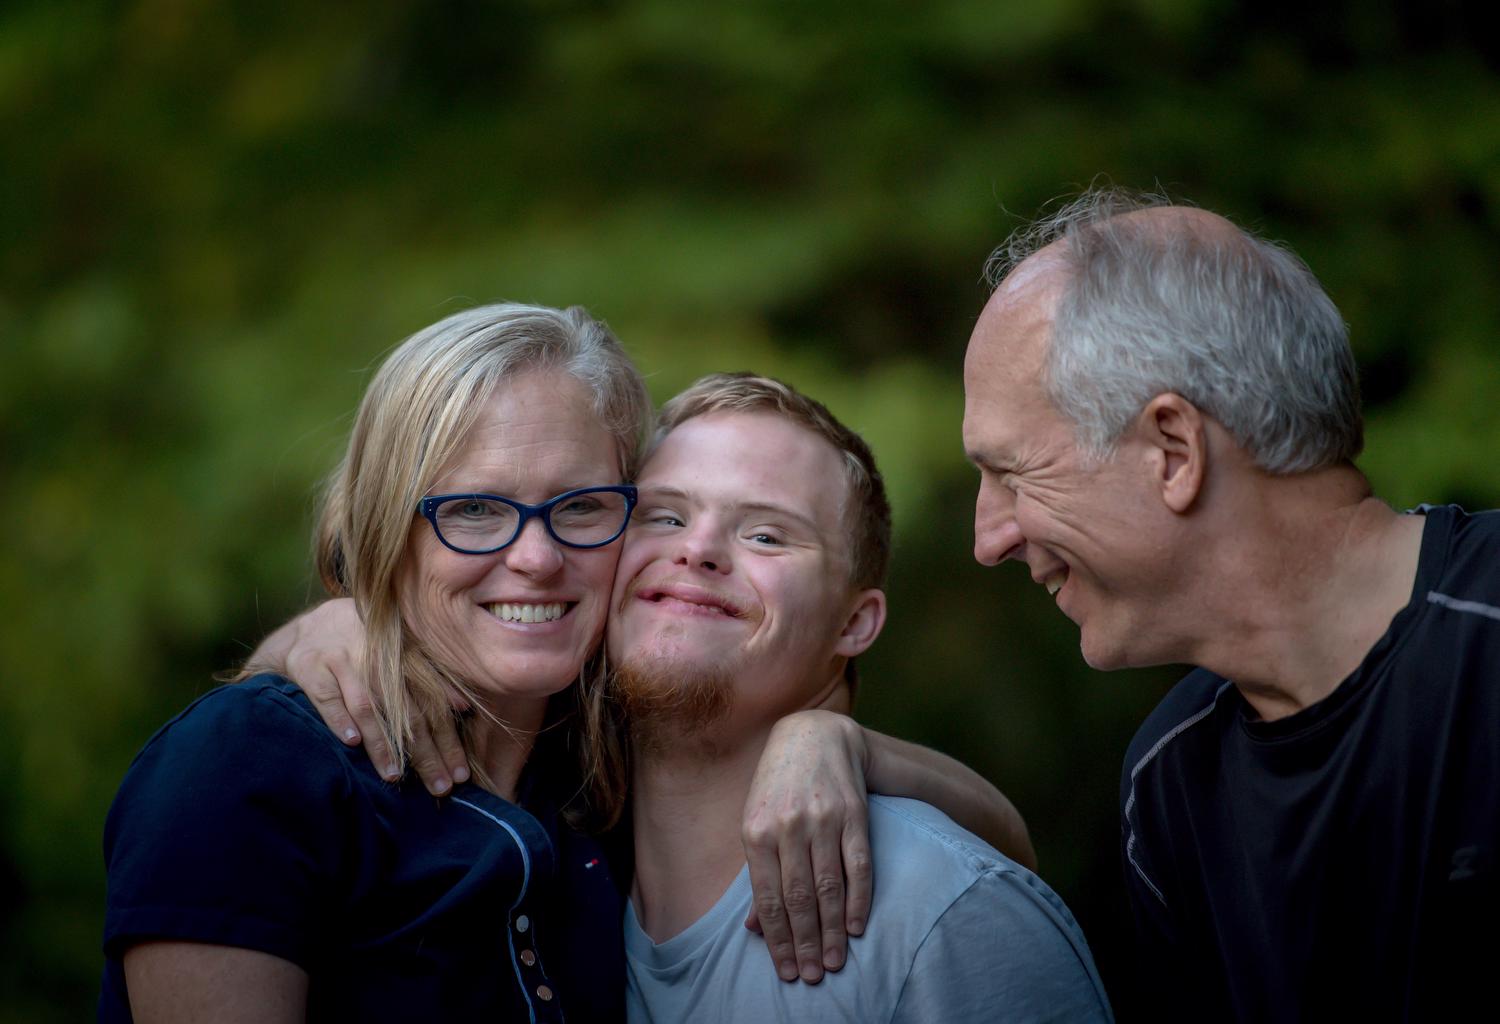 A family pose for a portrait. The mother has her arm around her son's shoulder and they are embracing cheek to cheek. The teenage son has down syndrome, and the father looks at the mother and son with a smile. 